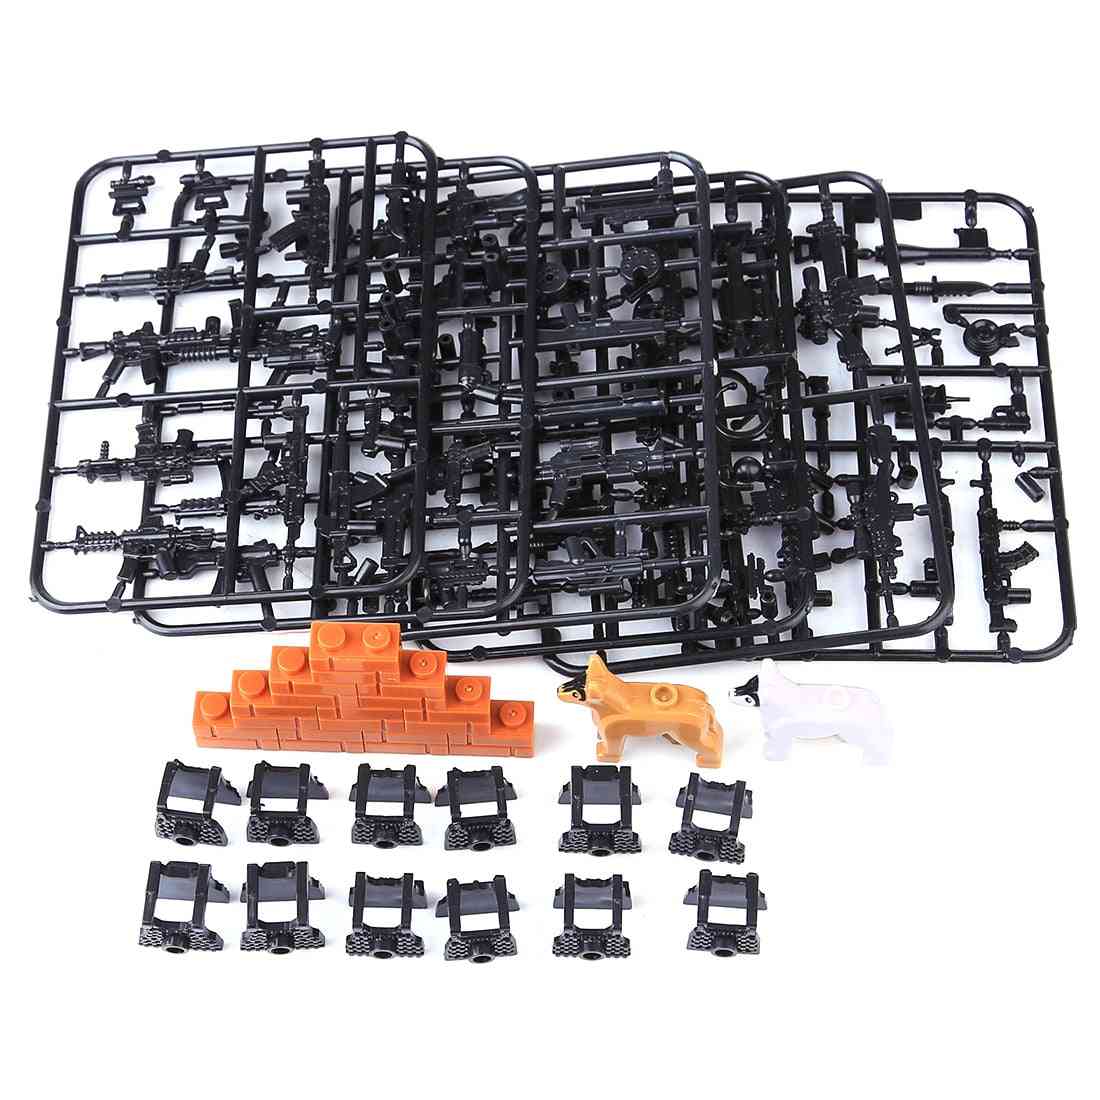 Small Particle Building Block Military Weapon Accessories Toy Set